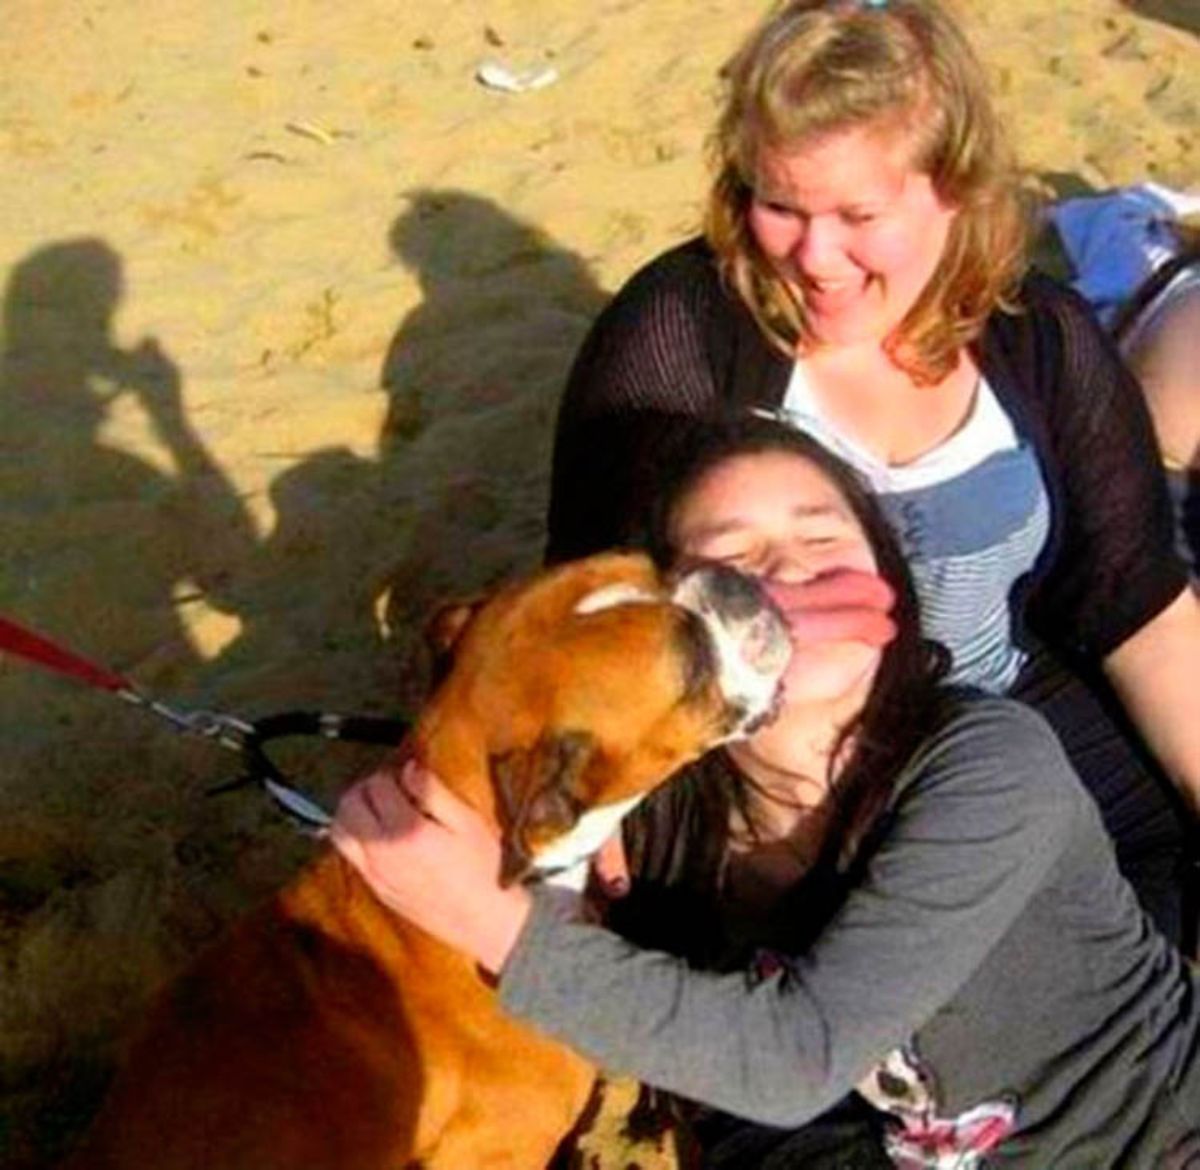 brown and white dog licking a girl's face with the tongue across the girl's mouth with another woman watching